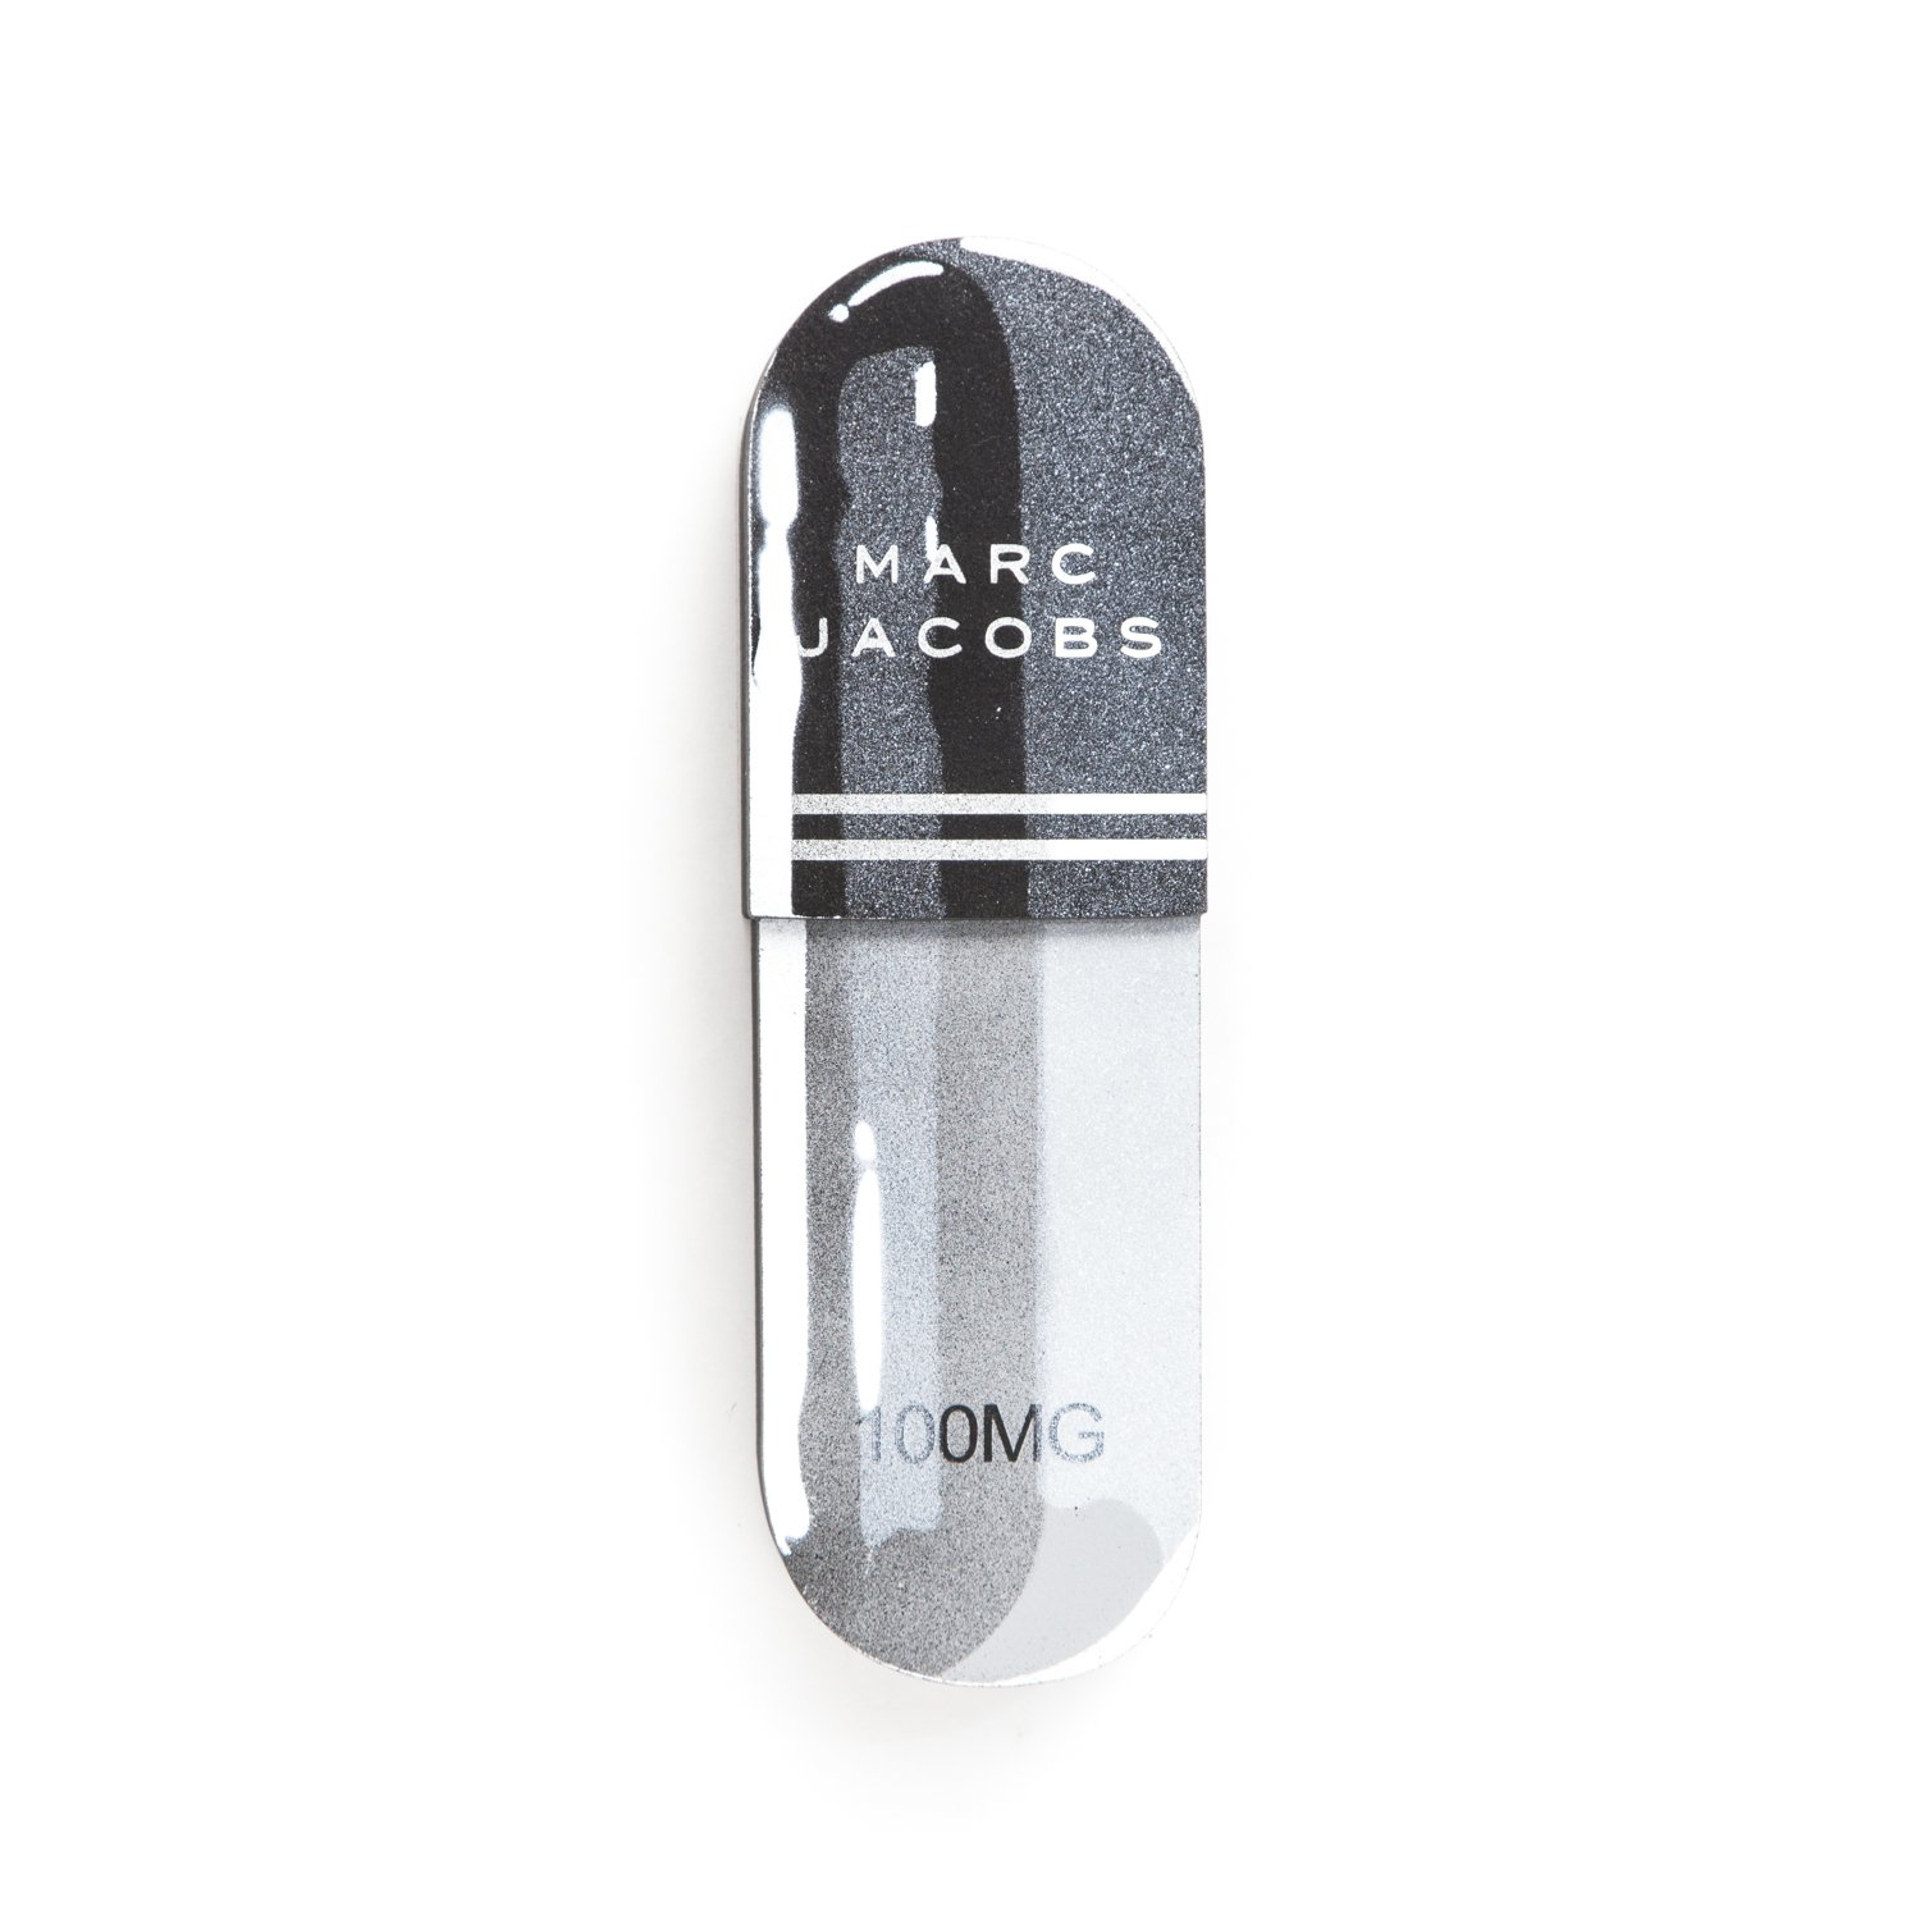 Original Micro Dose - Marc Jacobs by Denial | Overdose Collection